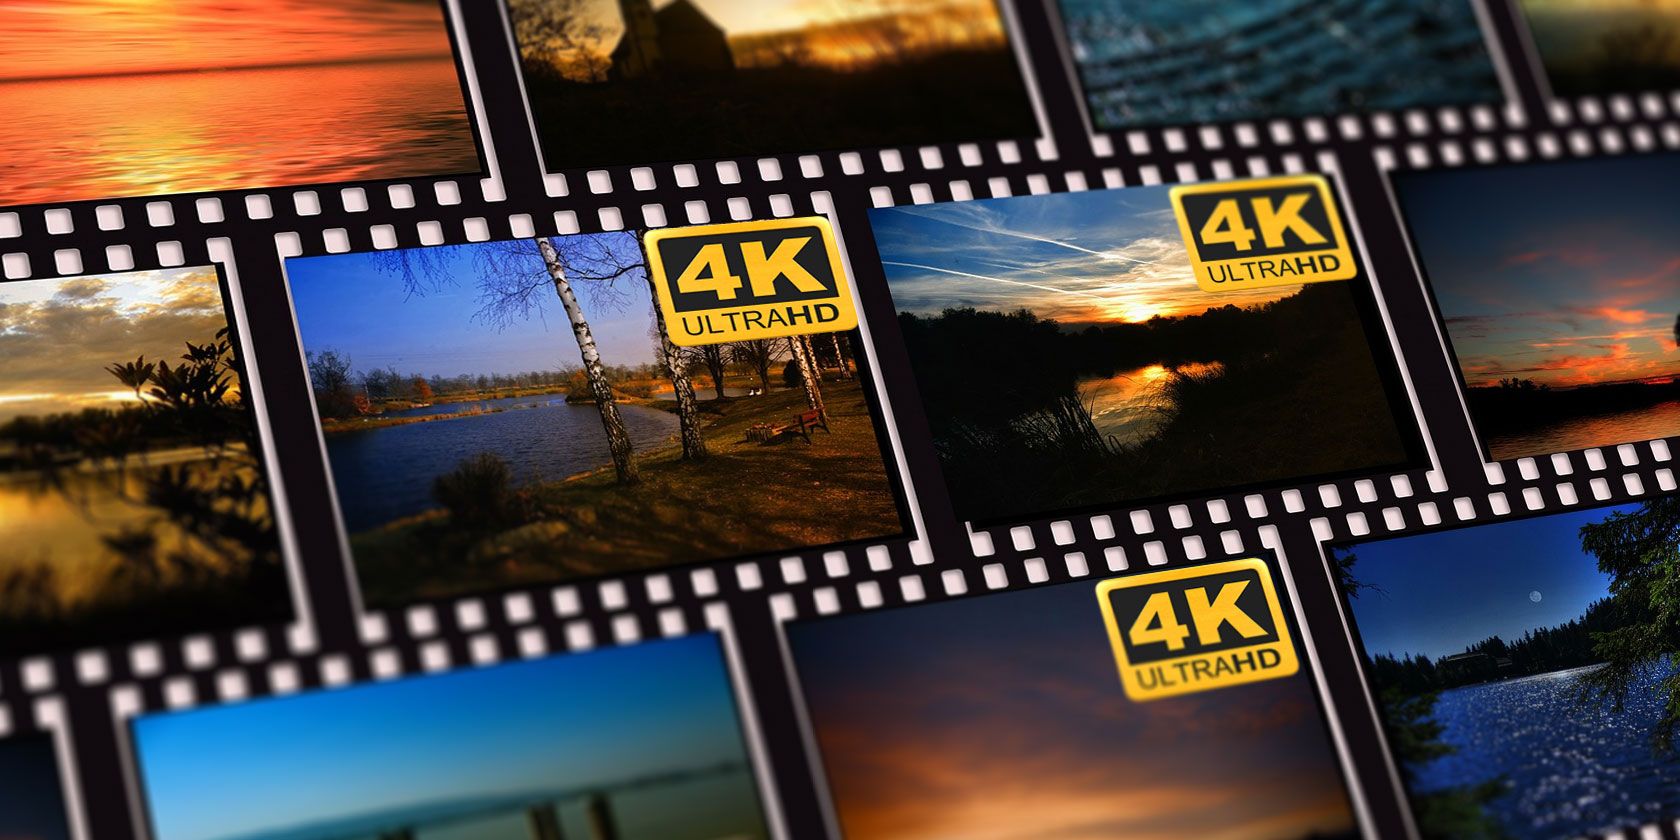 Download 4K Stock Footage - Royalty Free 4K Video